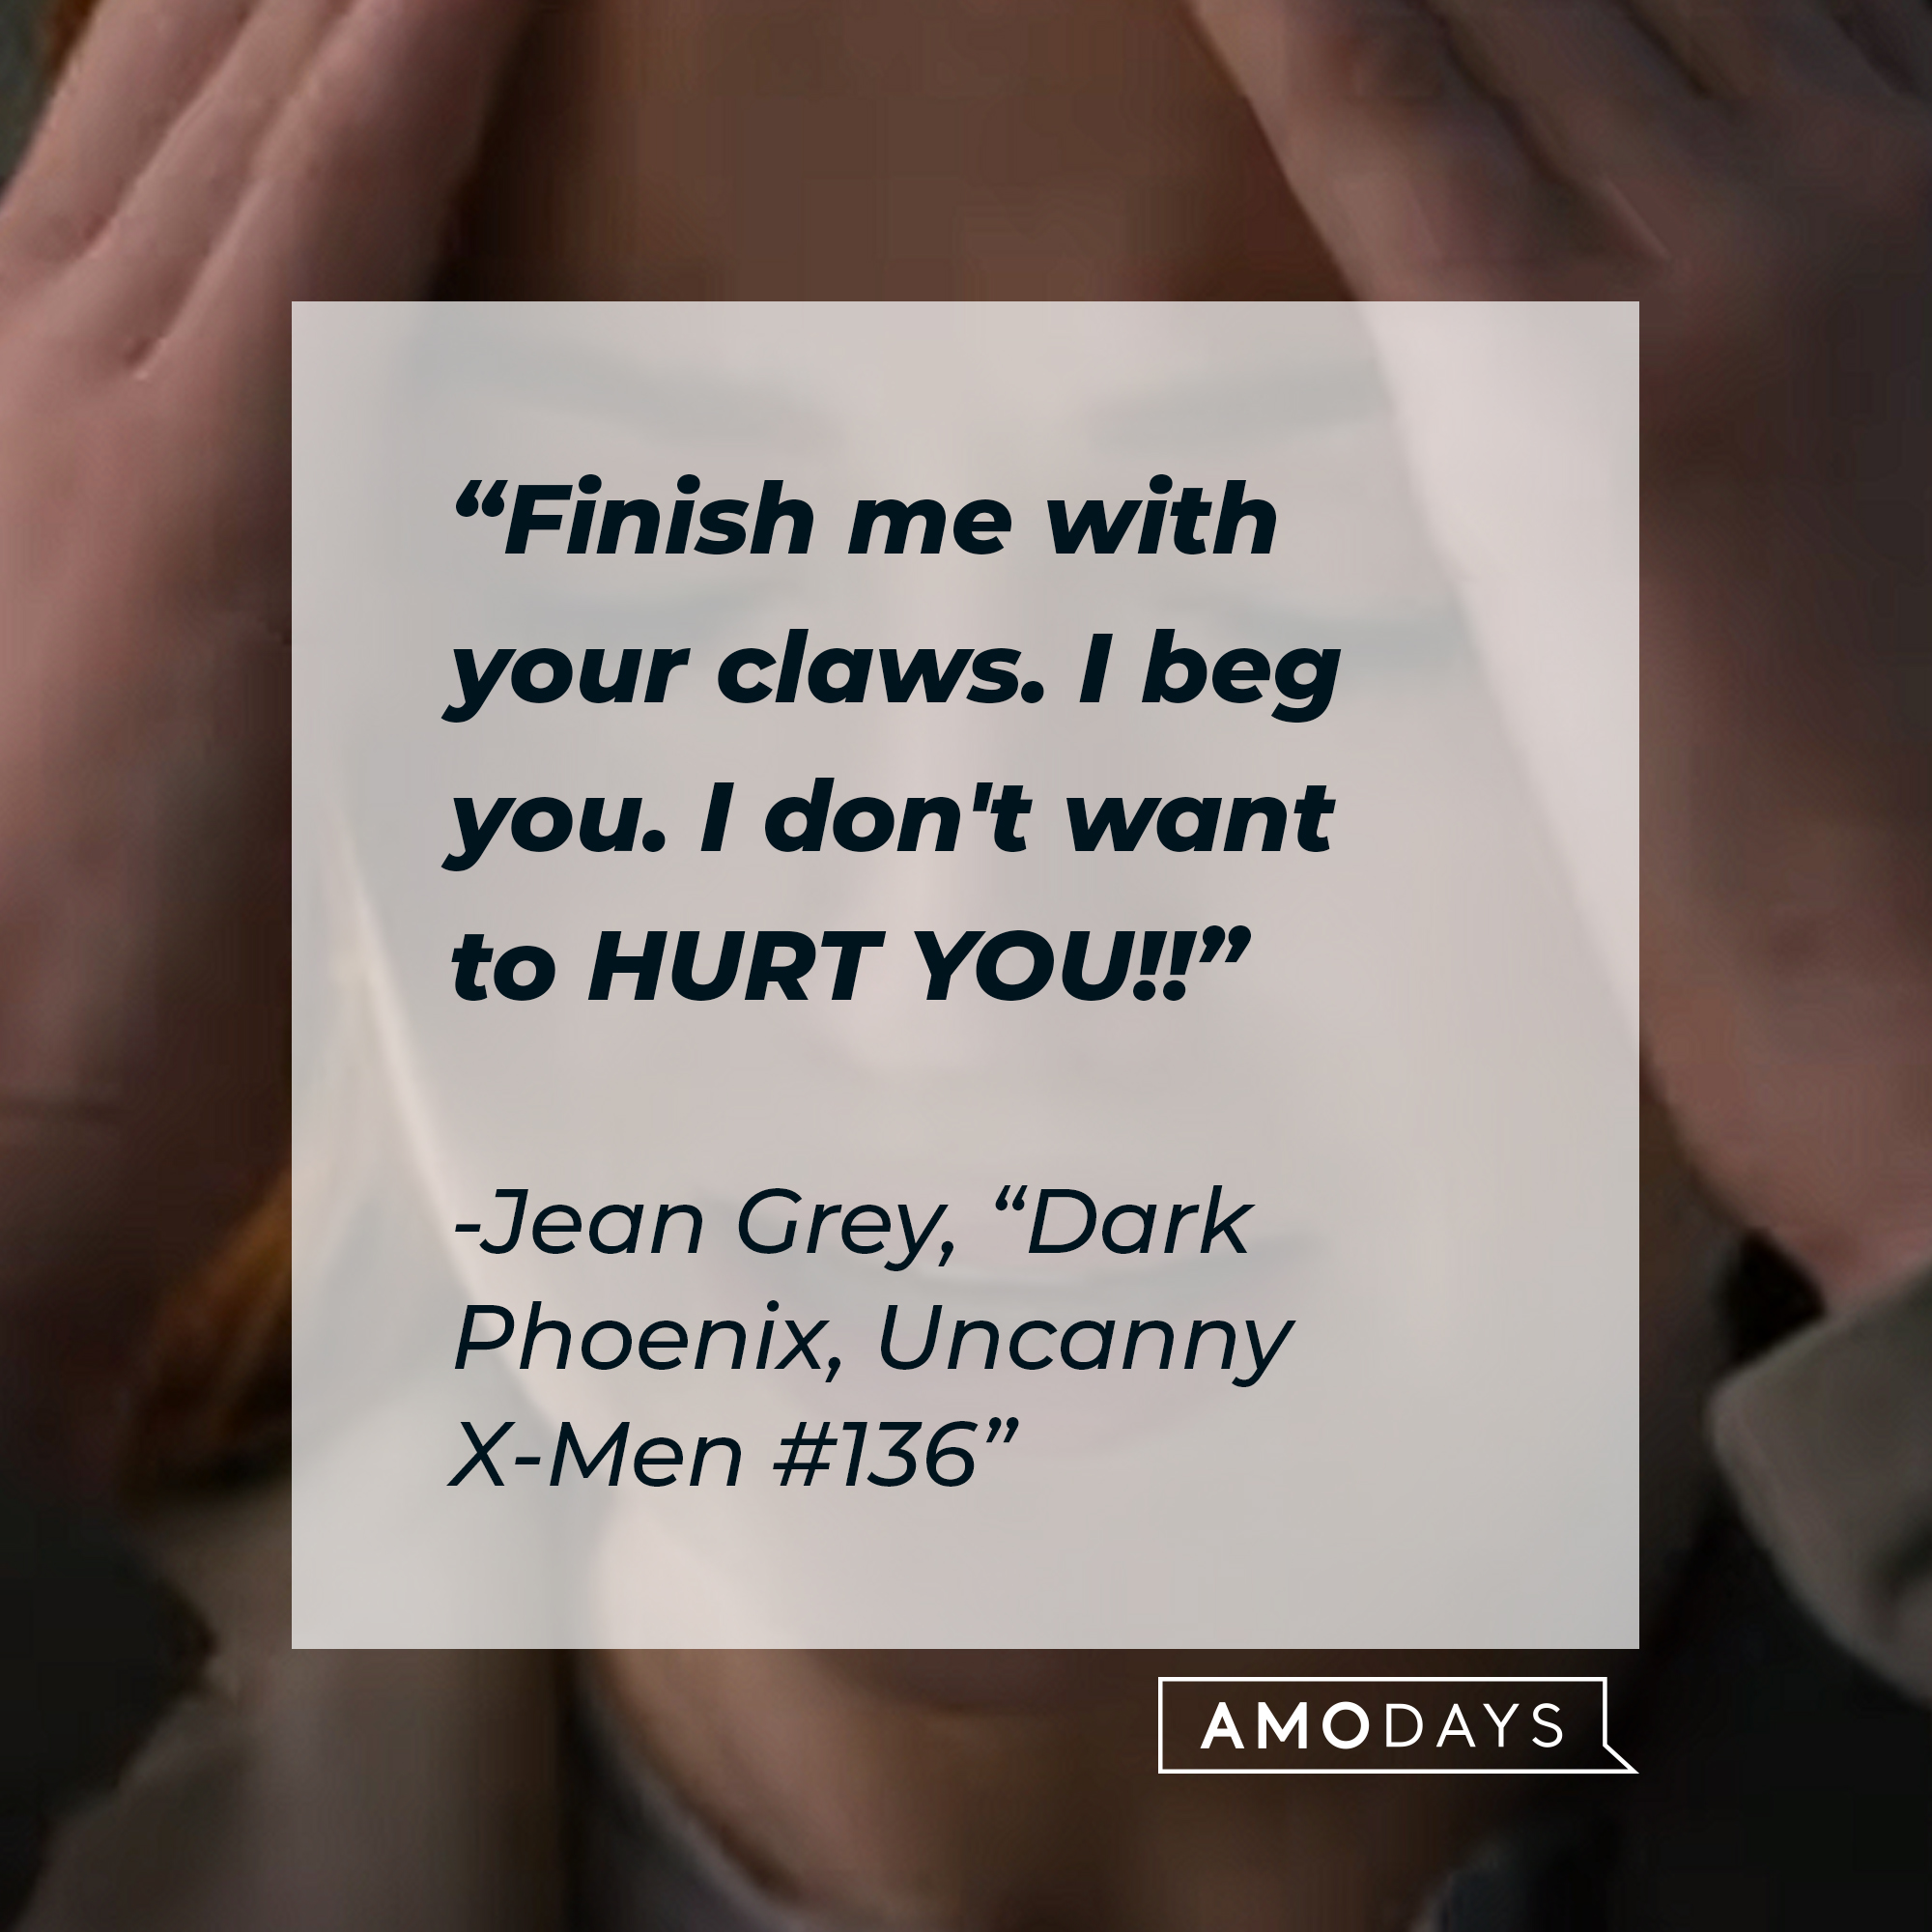 Jean Grey’s quote: "Finish me with your claws. I beg you. I don't want to HURT YOU!!" | Image: Youtube.com/20thCenturyStudios